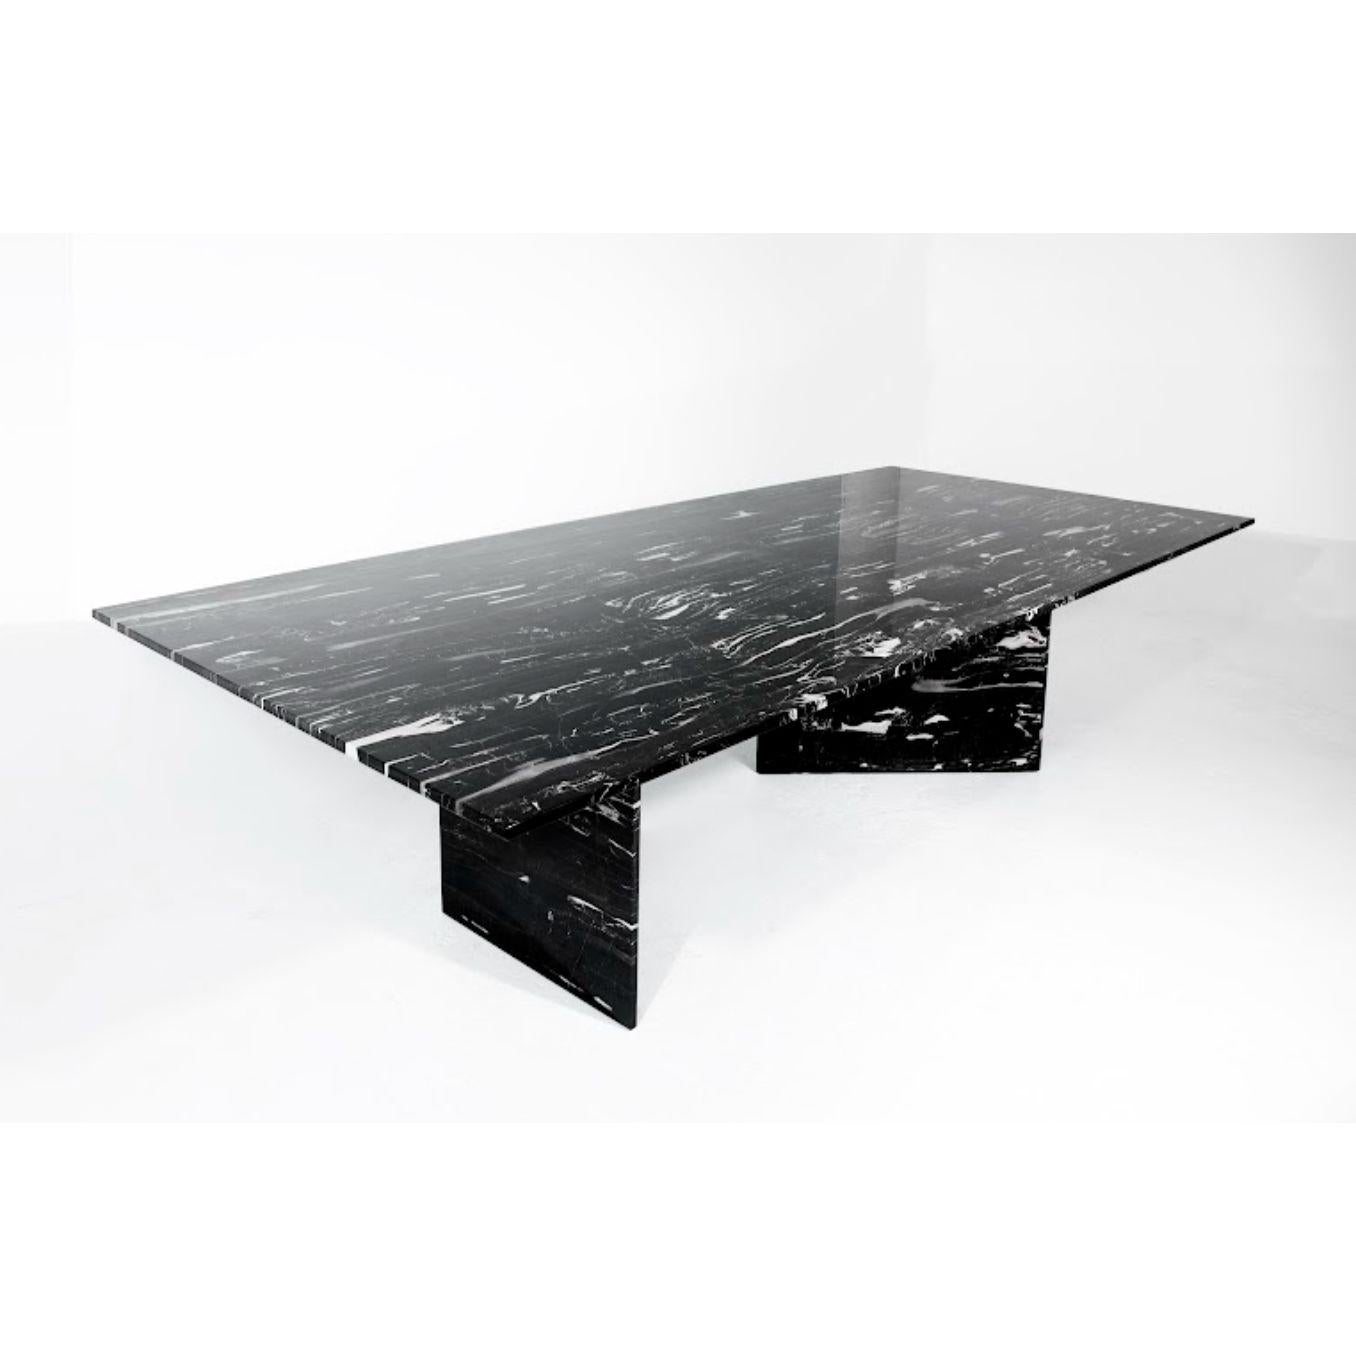 Great expectations dining table by Claste.
Dimensions: D 137.2 x W 289.5 x H 73.7 cm.
Material: Marble.
Weight: 443 kg.

Since 2017 Quinlan Osborne has cultivated an aesthetic in his work that is rooted in the passion for contemporary design he